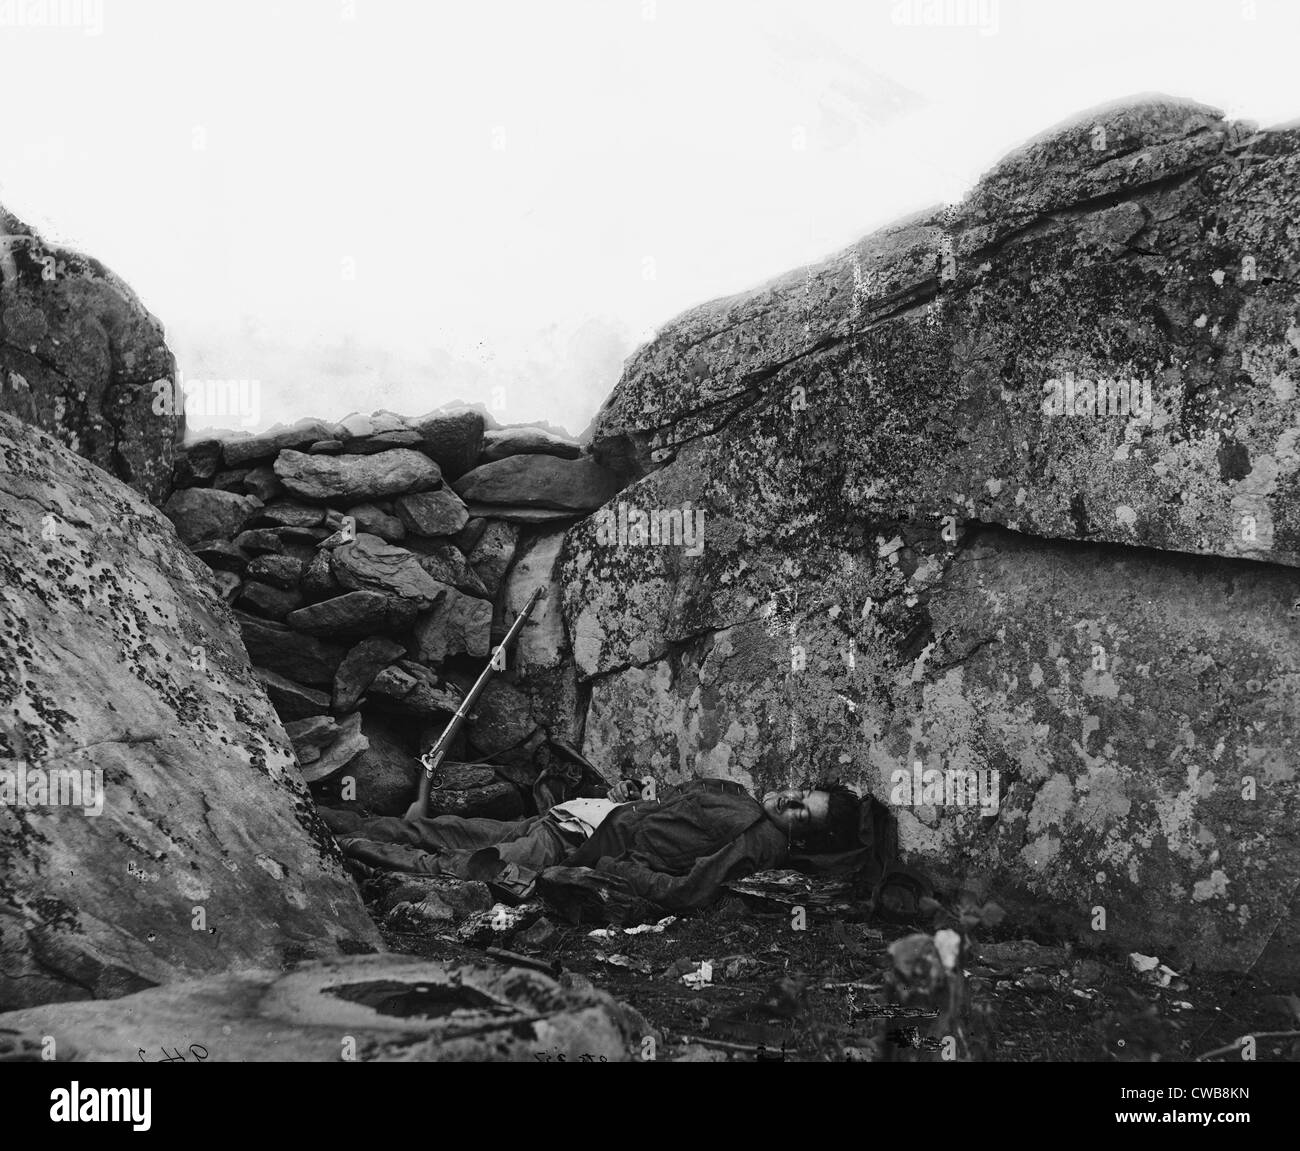 The Civil War. The Battle of Gettysburg. The Home of a Rebel Sharpshooter. A Dead Confederate soldier in Devil's Den, Stock Photo